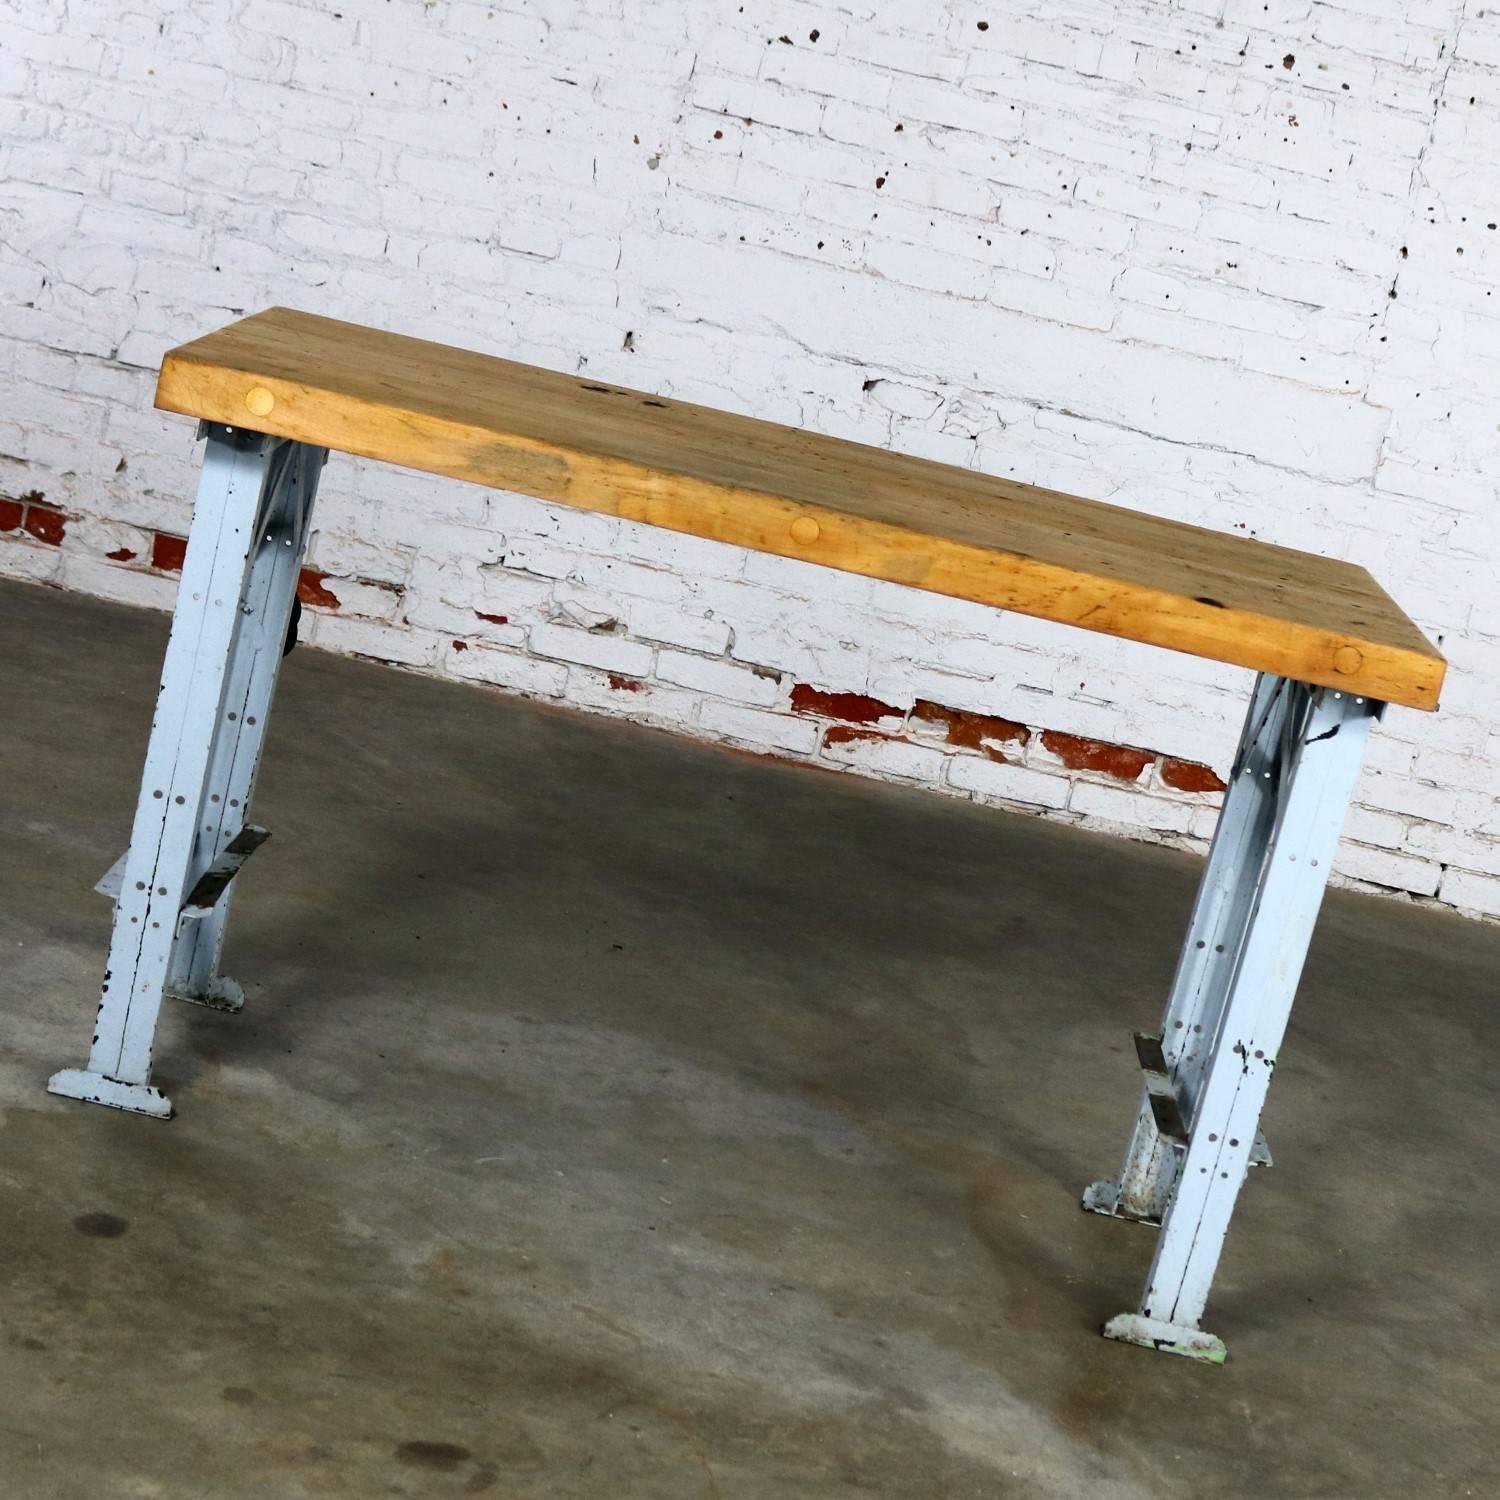 Amazing American Industrial work table with its original wood top and painted steel base. It is in solid sturdy condition and both top and base provide awesome age patina. We have sanded and oiled the wood surface, so it is ready to use but have not